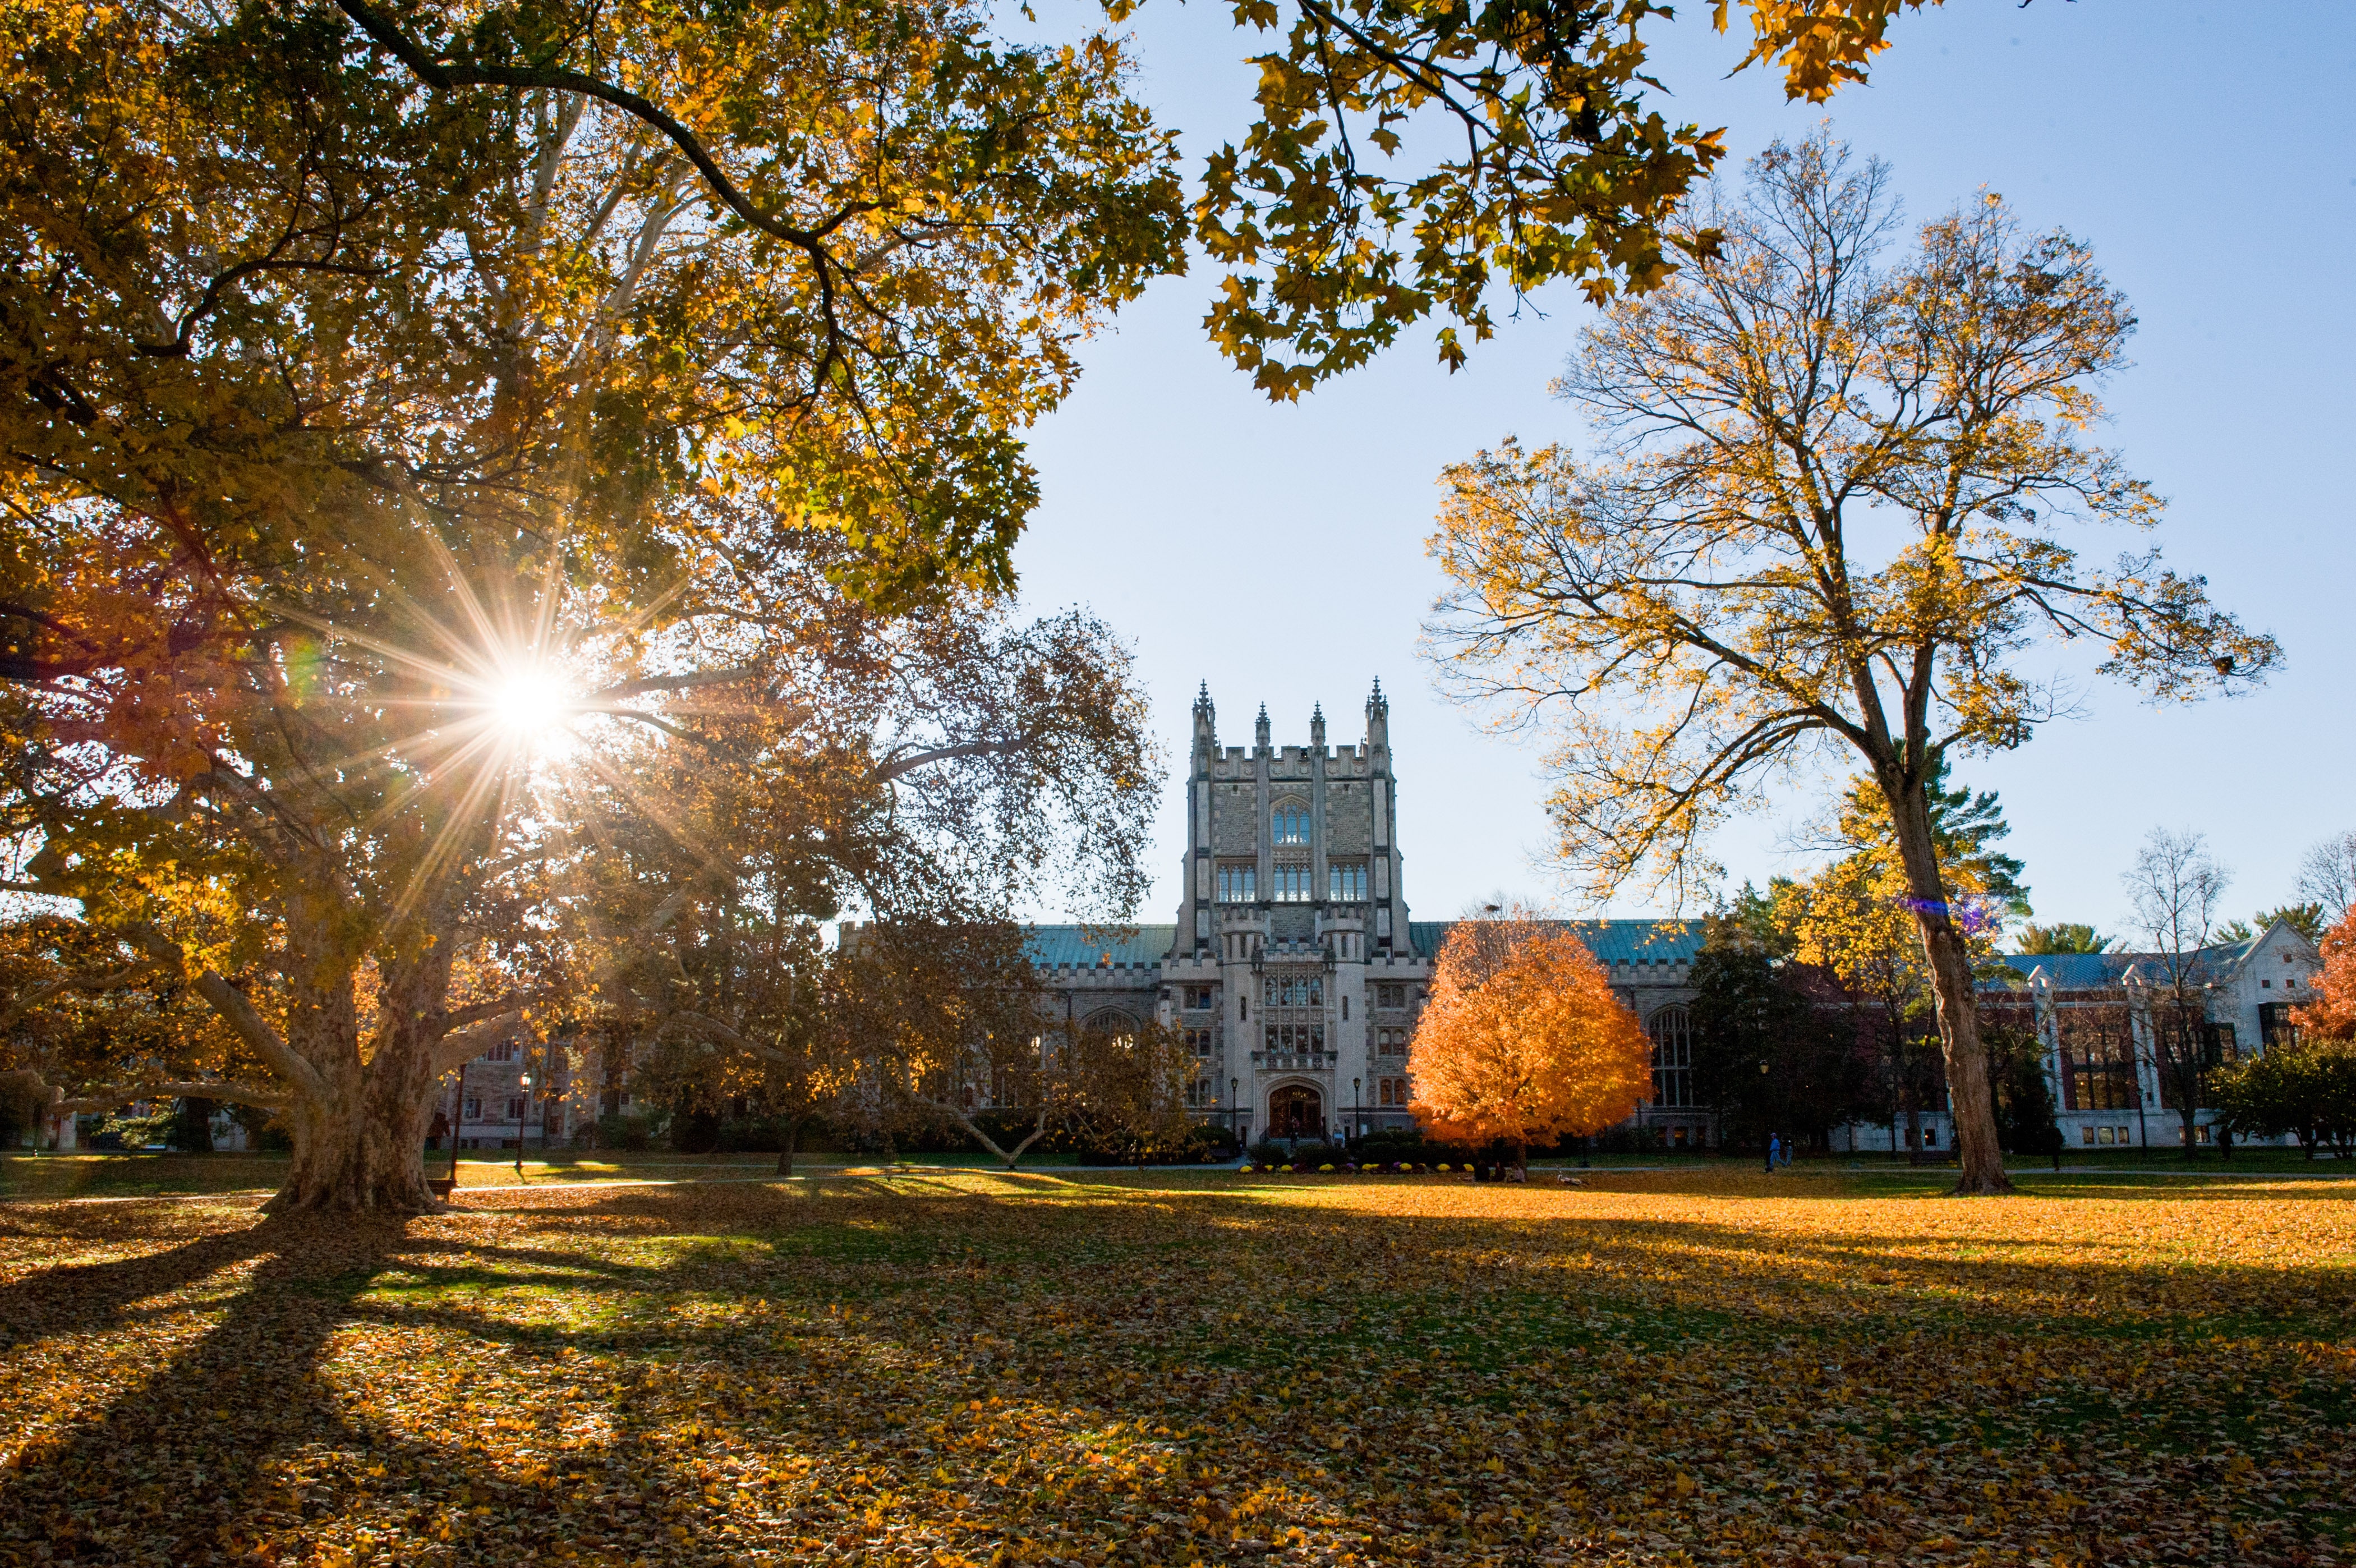 Late fall afternoon in front of Thompson Library on Vassar Campus and the sun is shining through the trees.